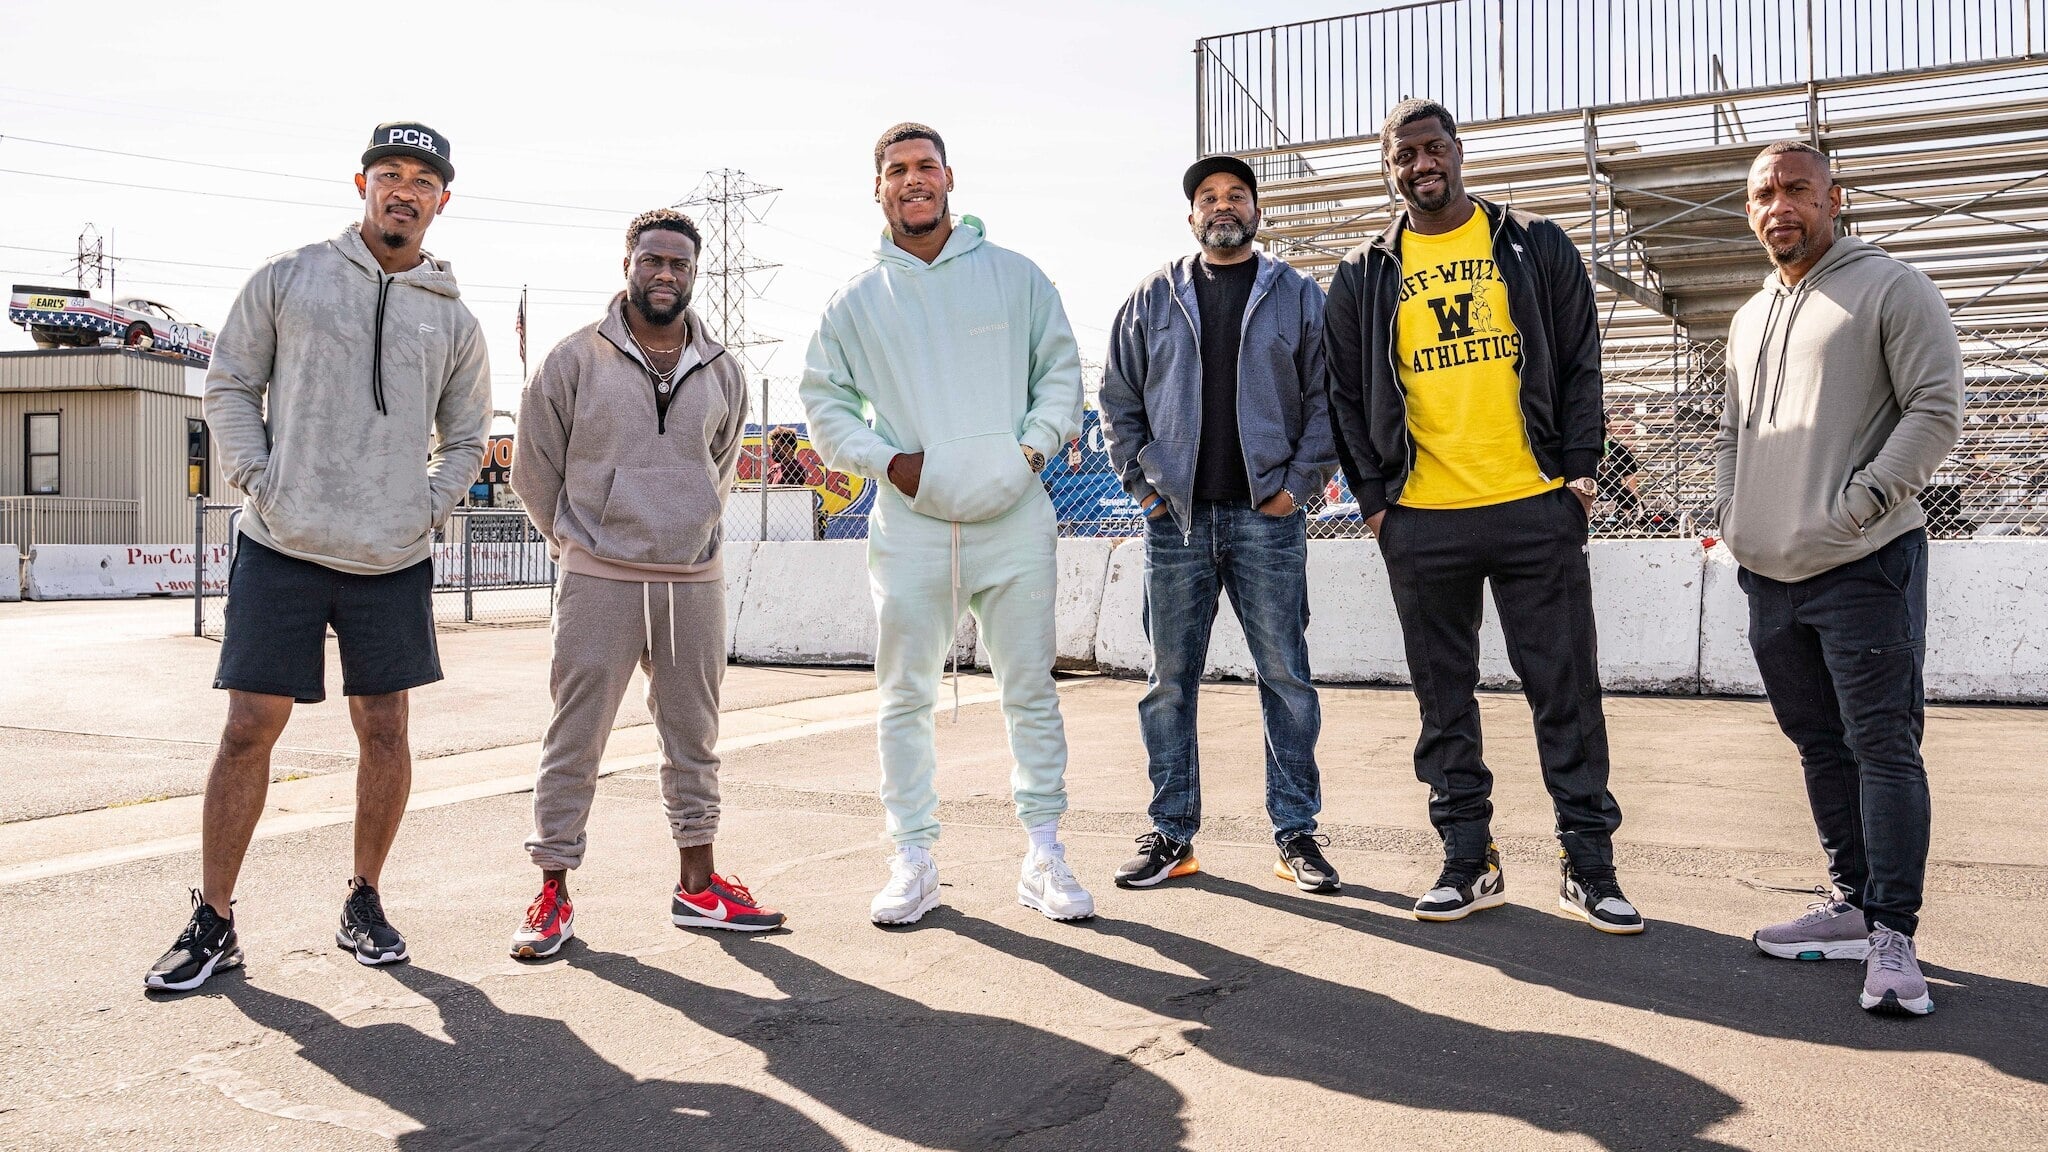 Kevin Hart's Muscle Car Crew